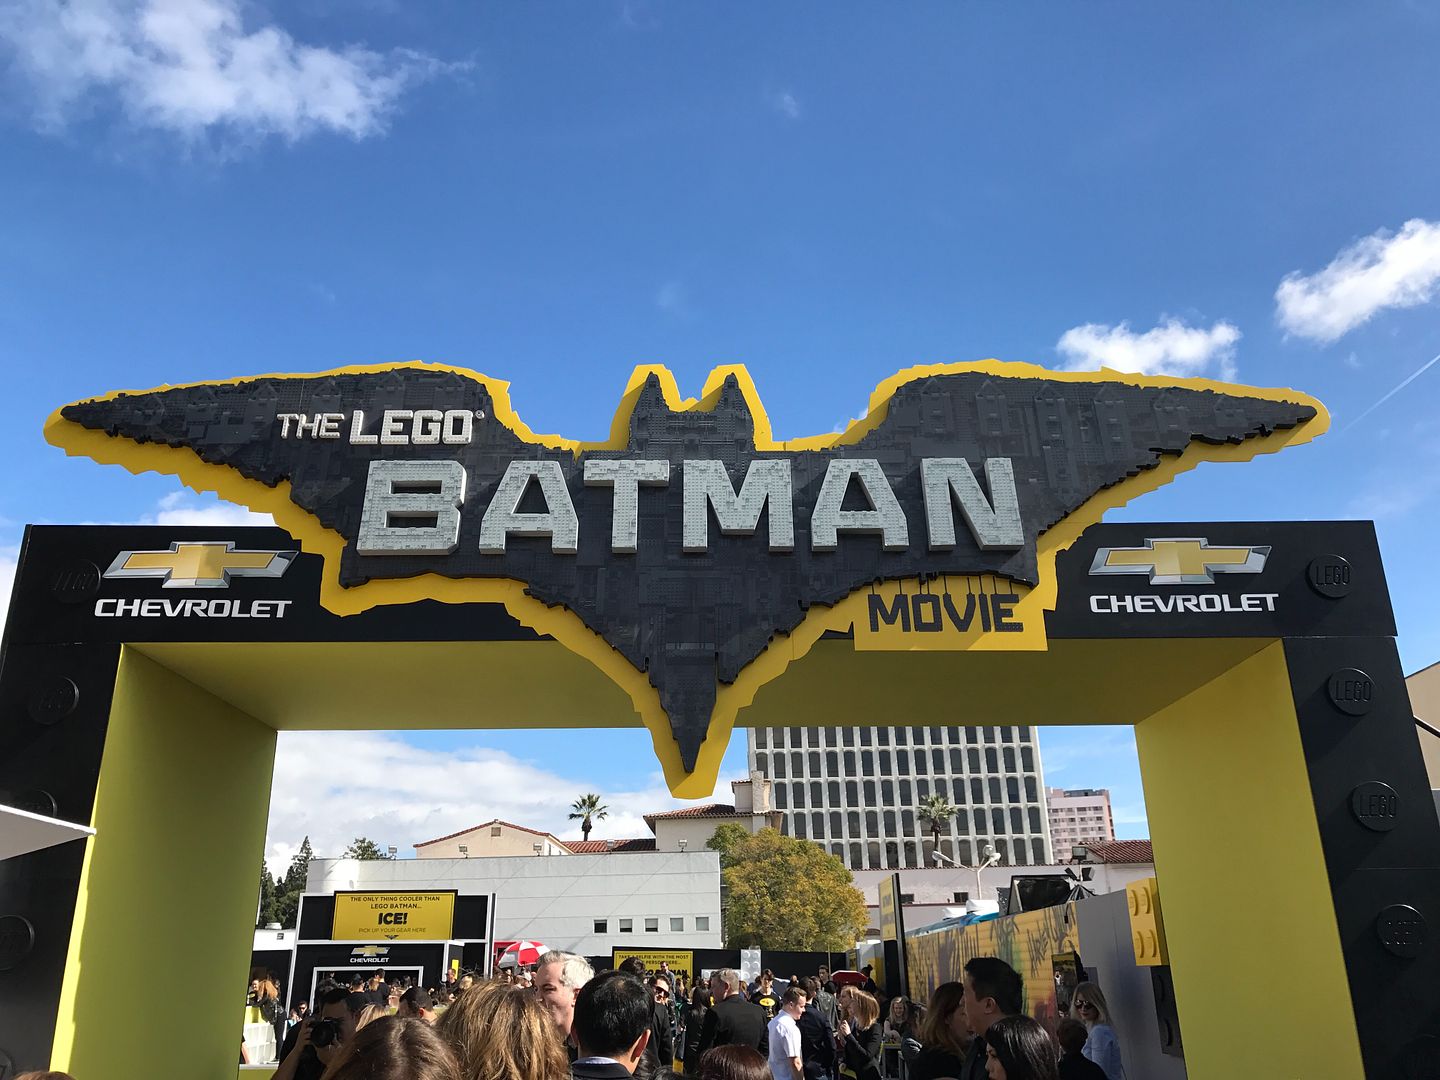 LEGO Batman Movie premiere party: ideas for your own kids' birthday party